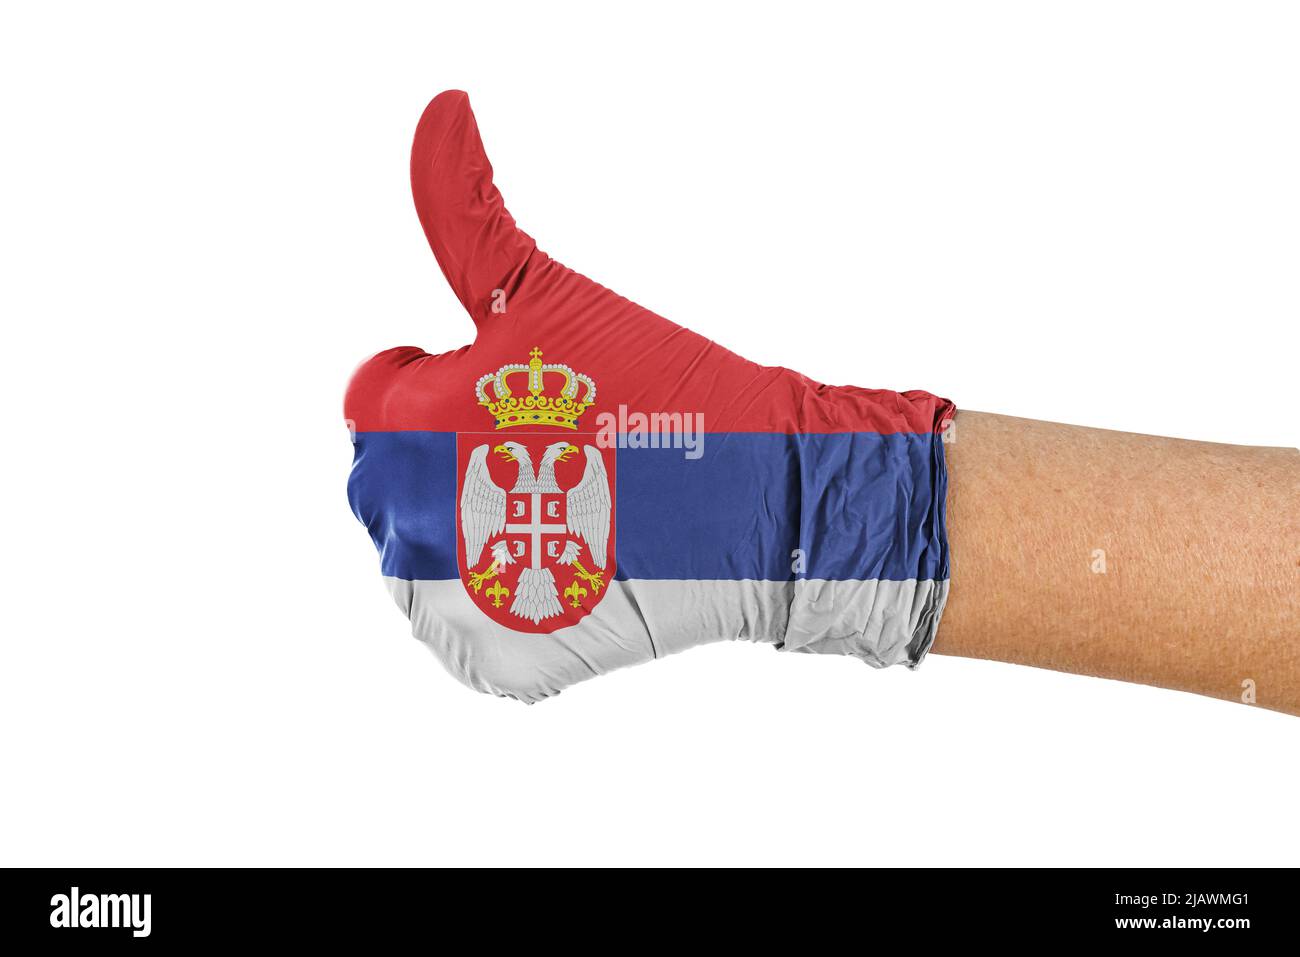 Serbia flag on a medical glove showing thumbs up sign Stock Photo